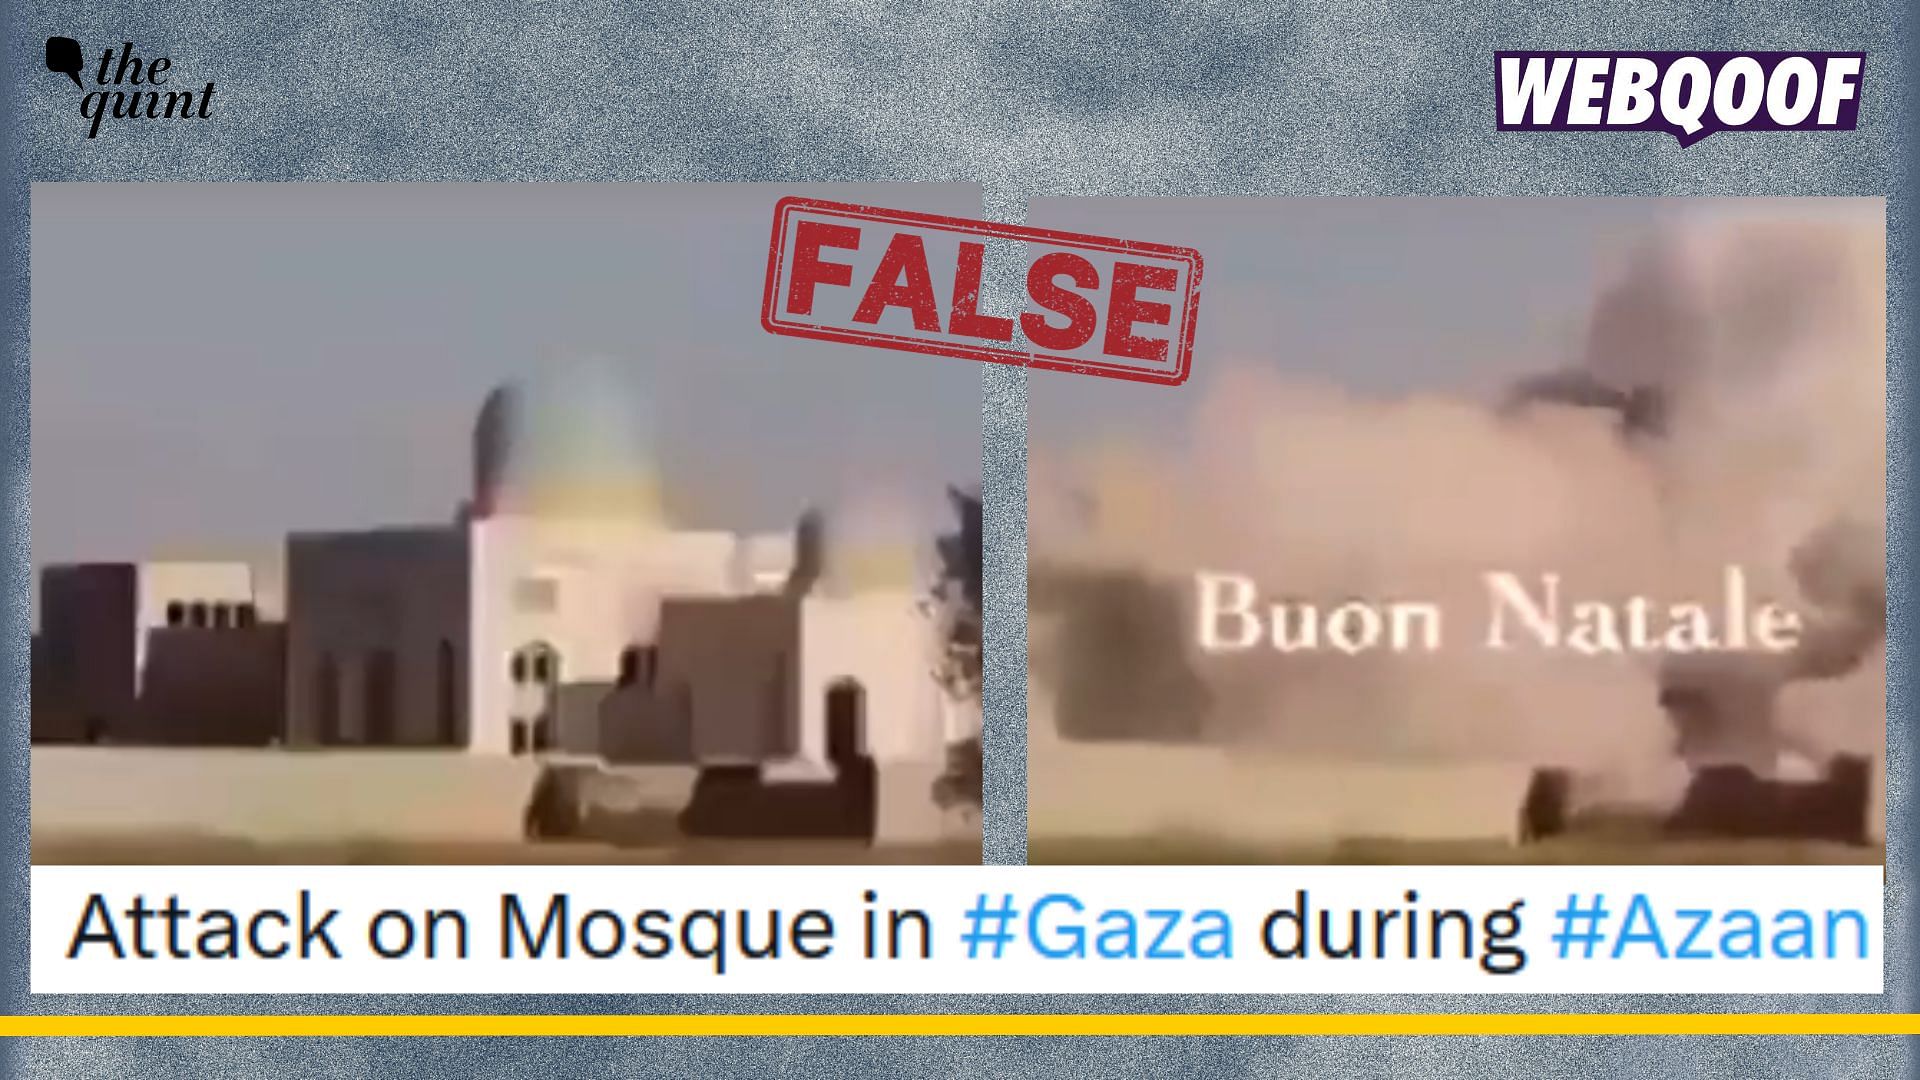 <div class="paragraphs"><p>Fact-Check: The viral video is not a recent one from Gaza. It shows a mosque destroyed by ISIS in Raqqa, Syria in 2014.</p></div>